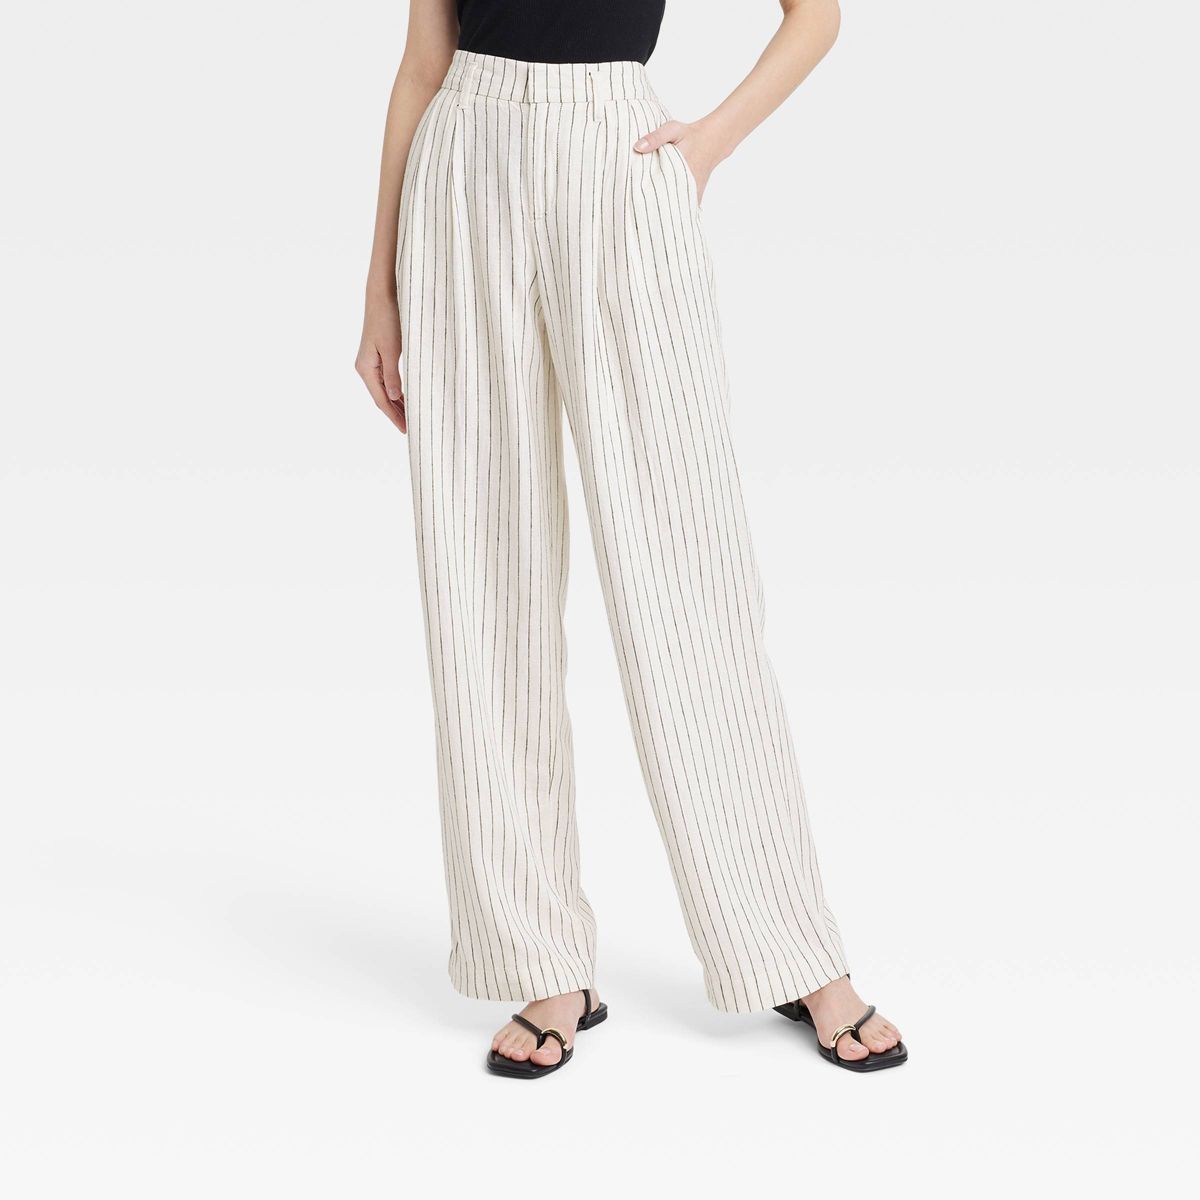 Women's High-Rise Linen Pleated Front Straight Pants - A New Day™ Cream/Black Pinstripe 6 | Target